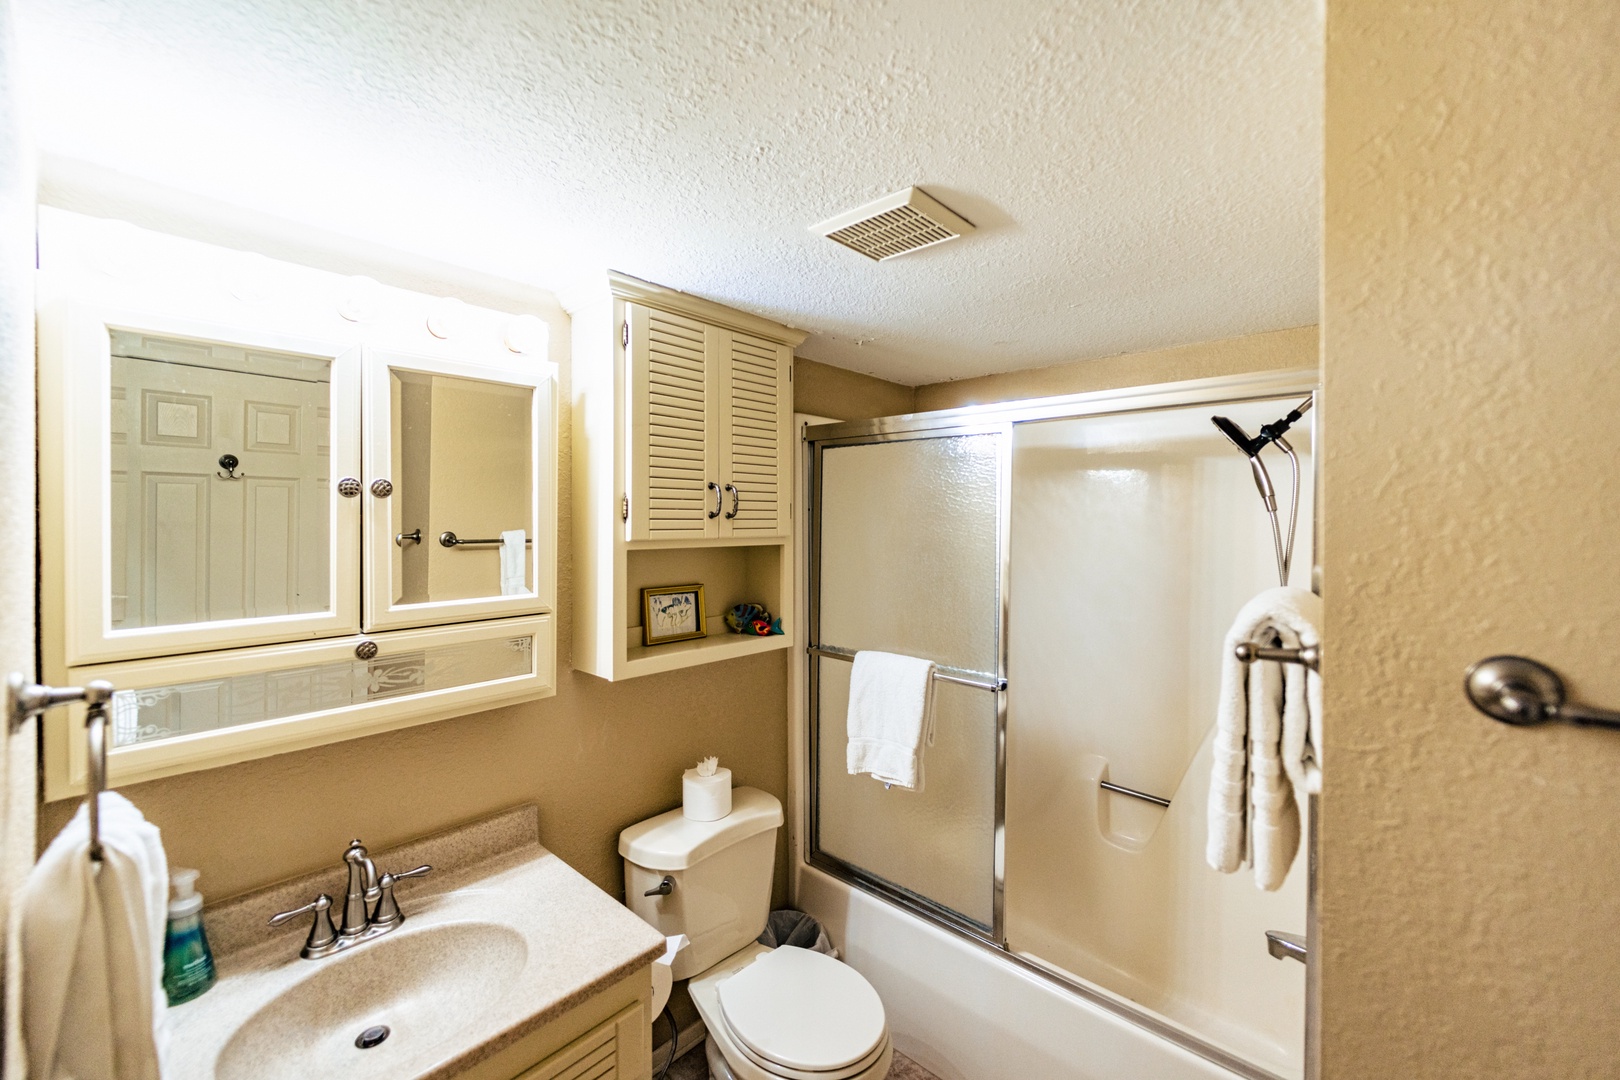 The queen ensuite includes a single vanity & shower/tub combo